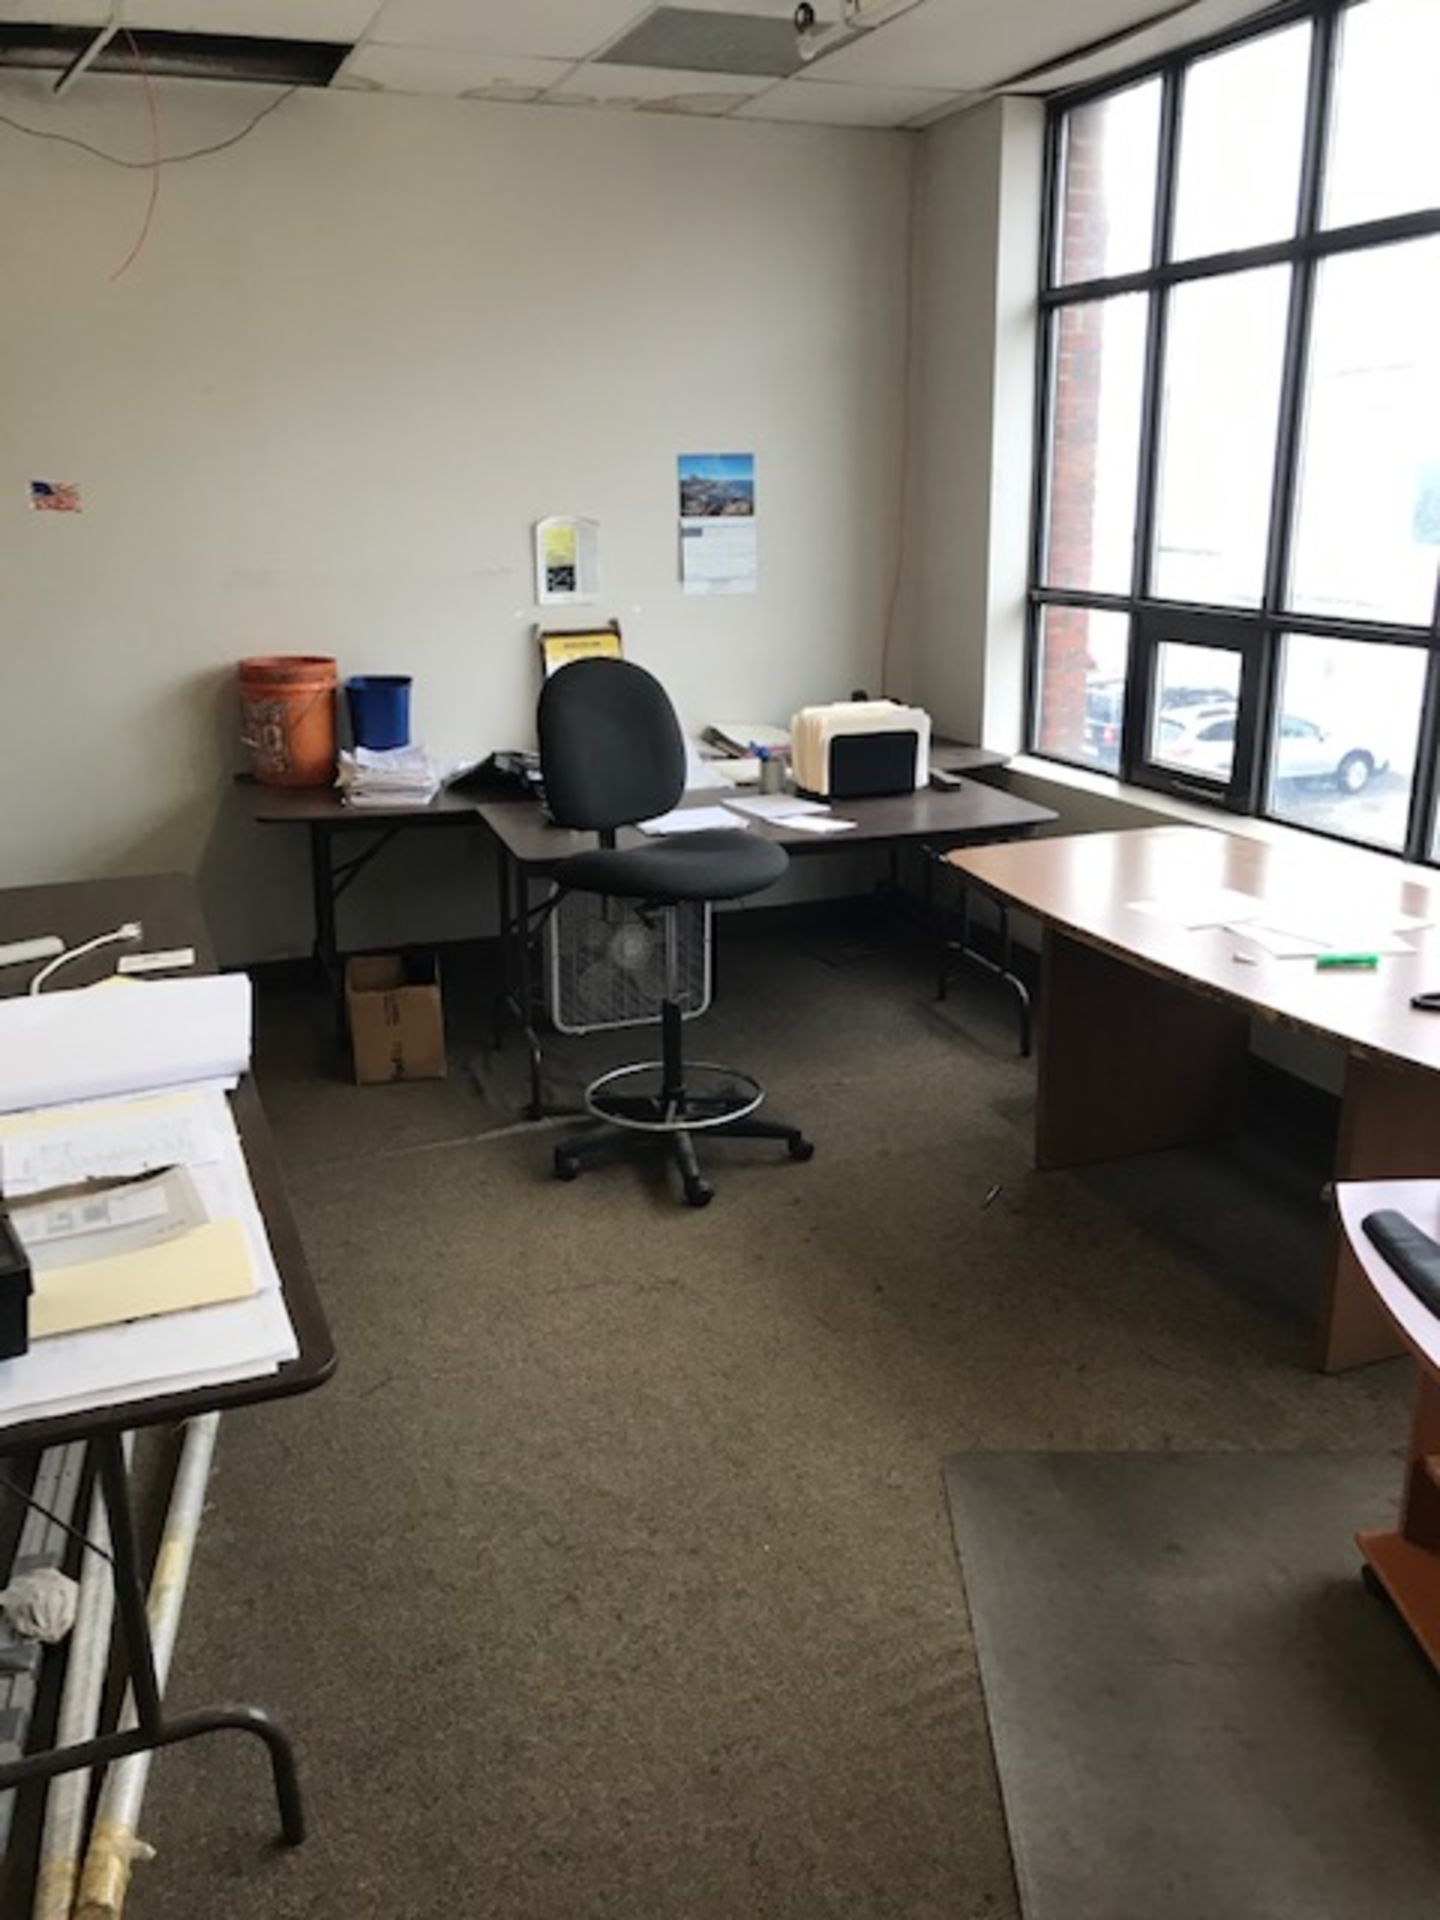 {LOT} Balance in Offices Furniture, Etc. (No Paperwork/Files) - Image 2 of 3